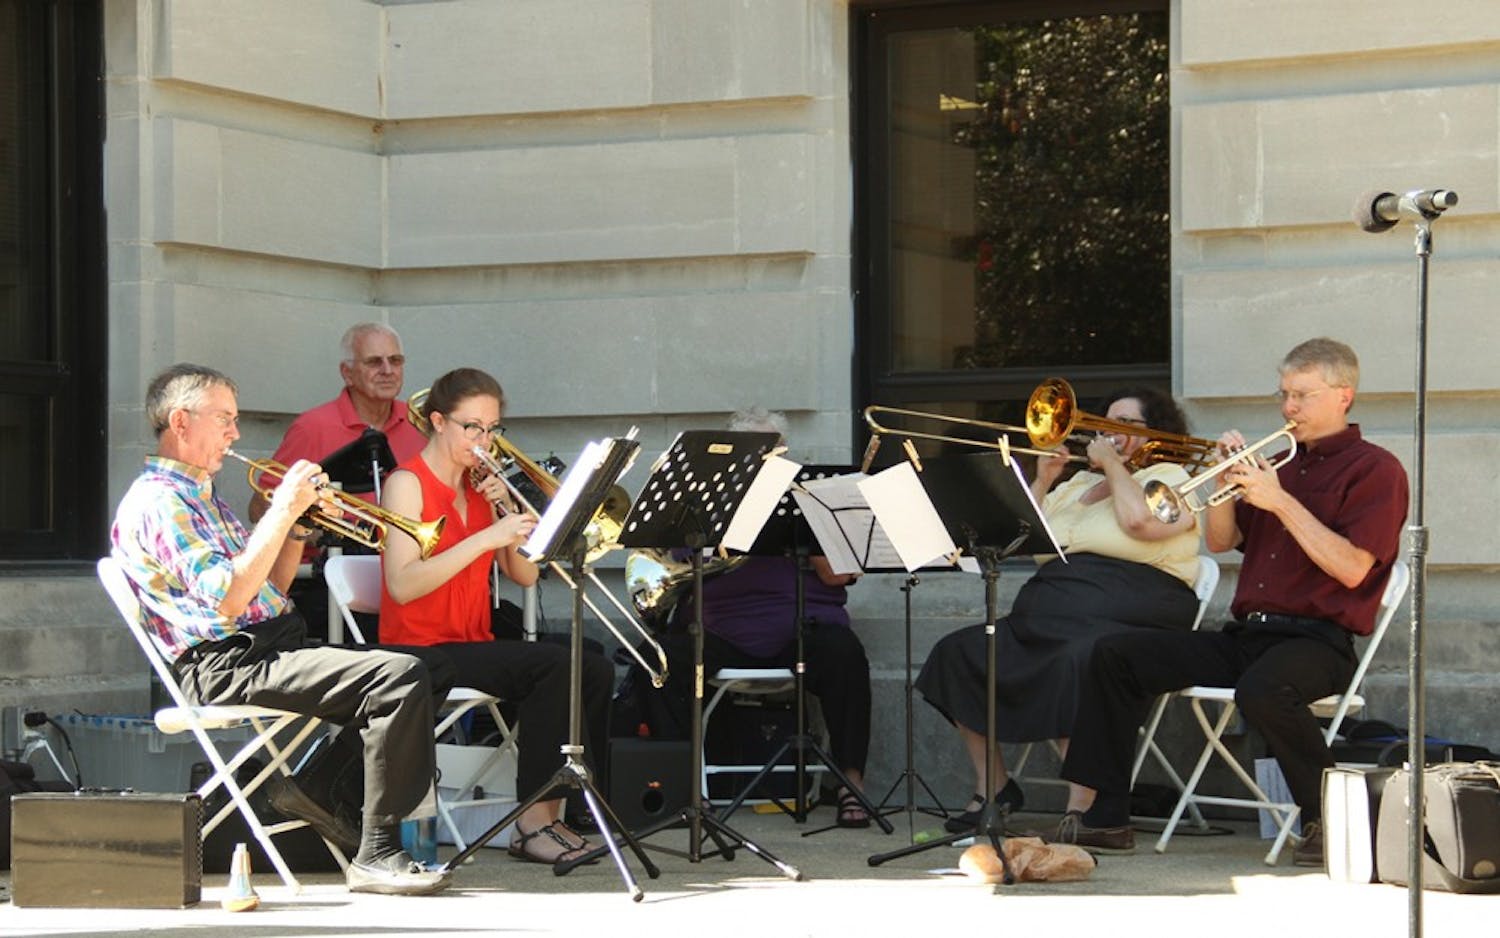 The Bloomington Brass Quintet performs during the Bicentennial Torch Relay Exhibit Tuesday at the Monroe County Courthouse lawn.